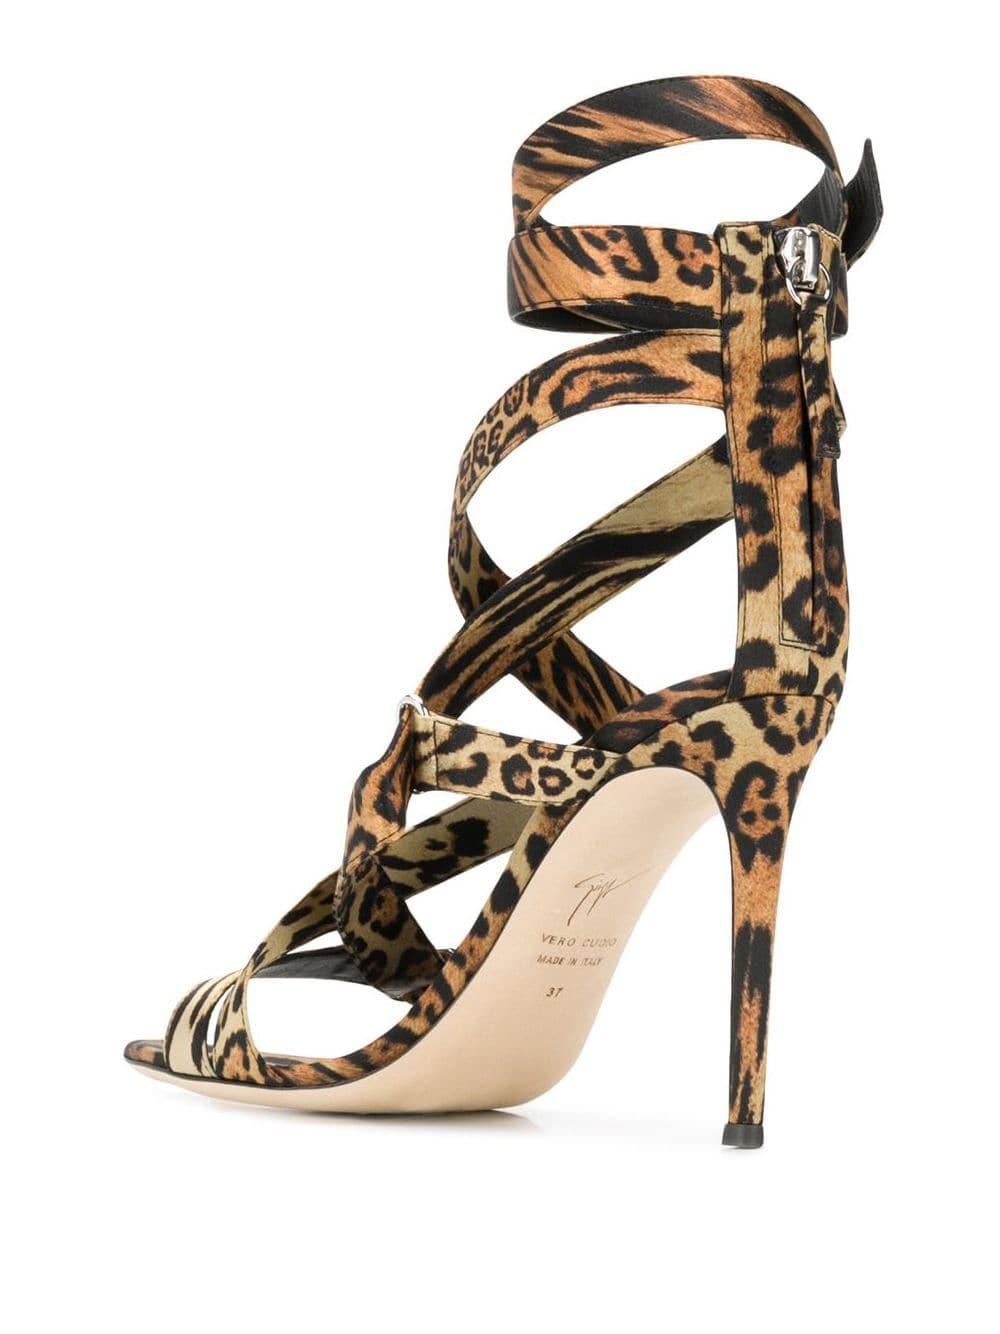 Giuseppe Zanotti Leather Leopard Strappy Sandals in Brown - Lyst